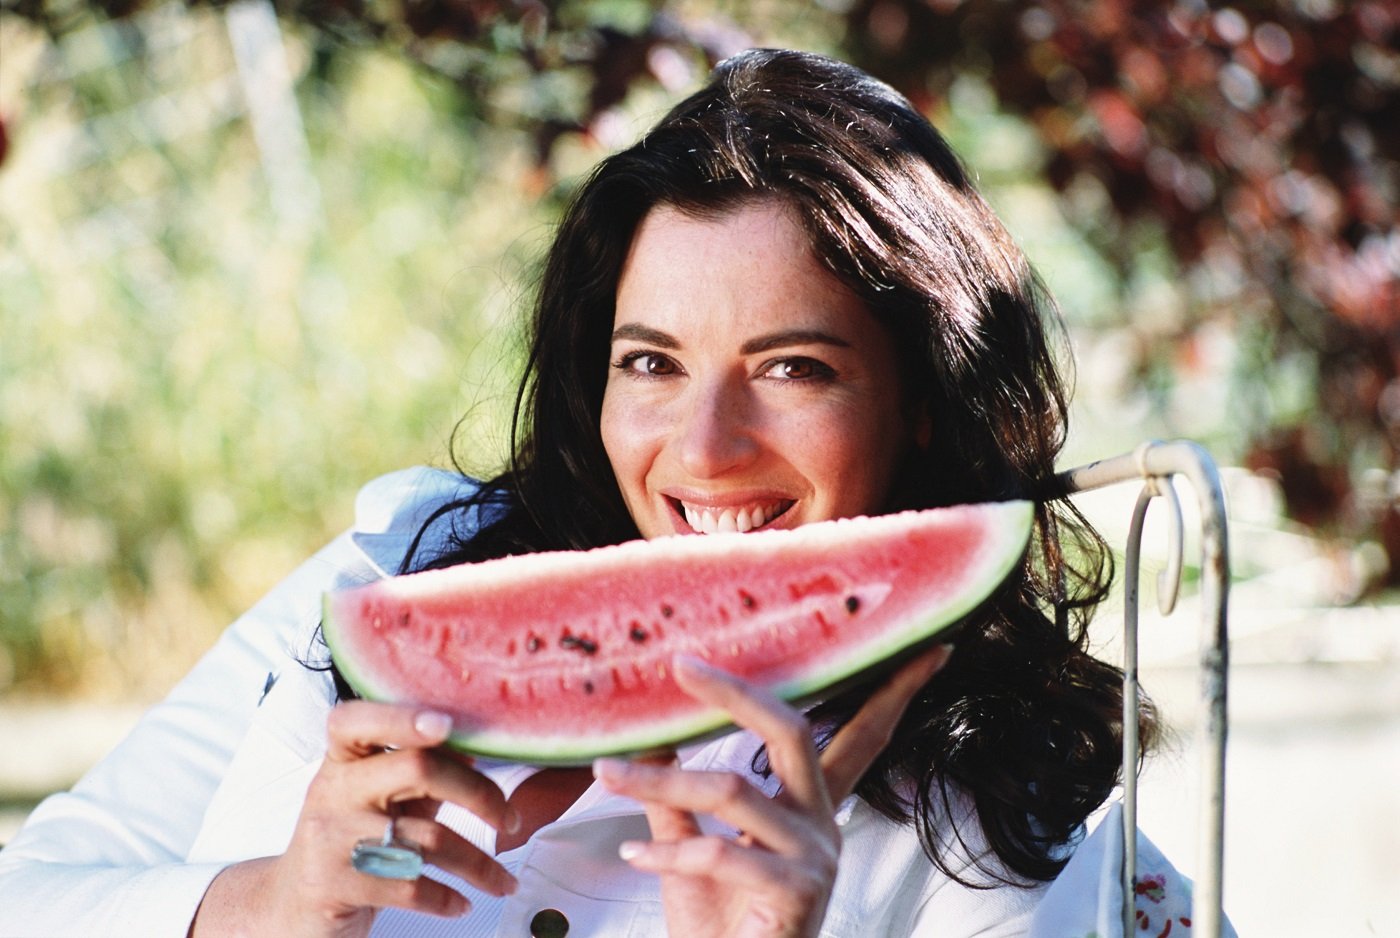 Nigella Lawson poses for a portrait on June 1, 2005 in London